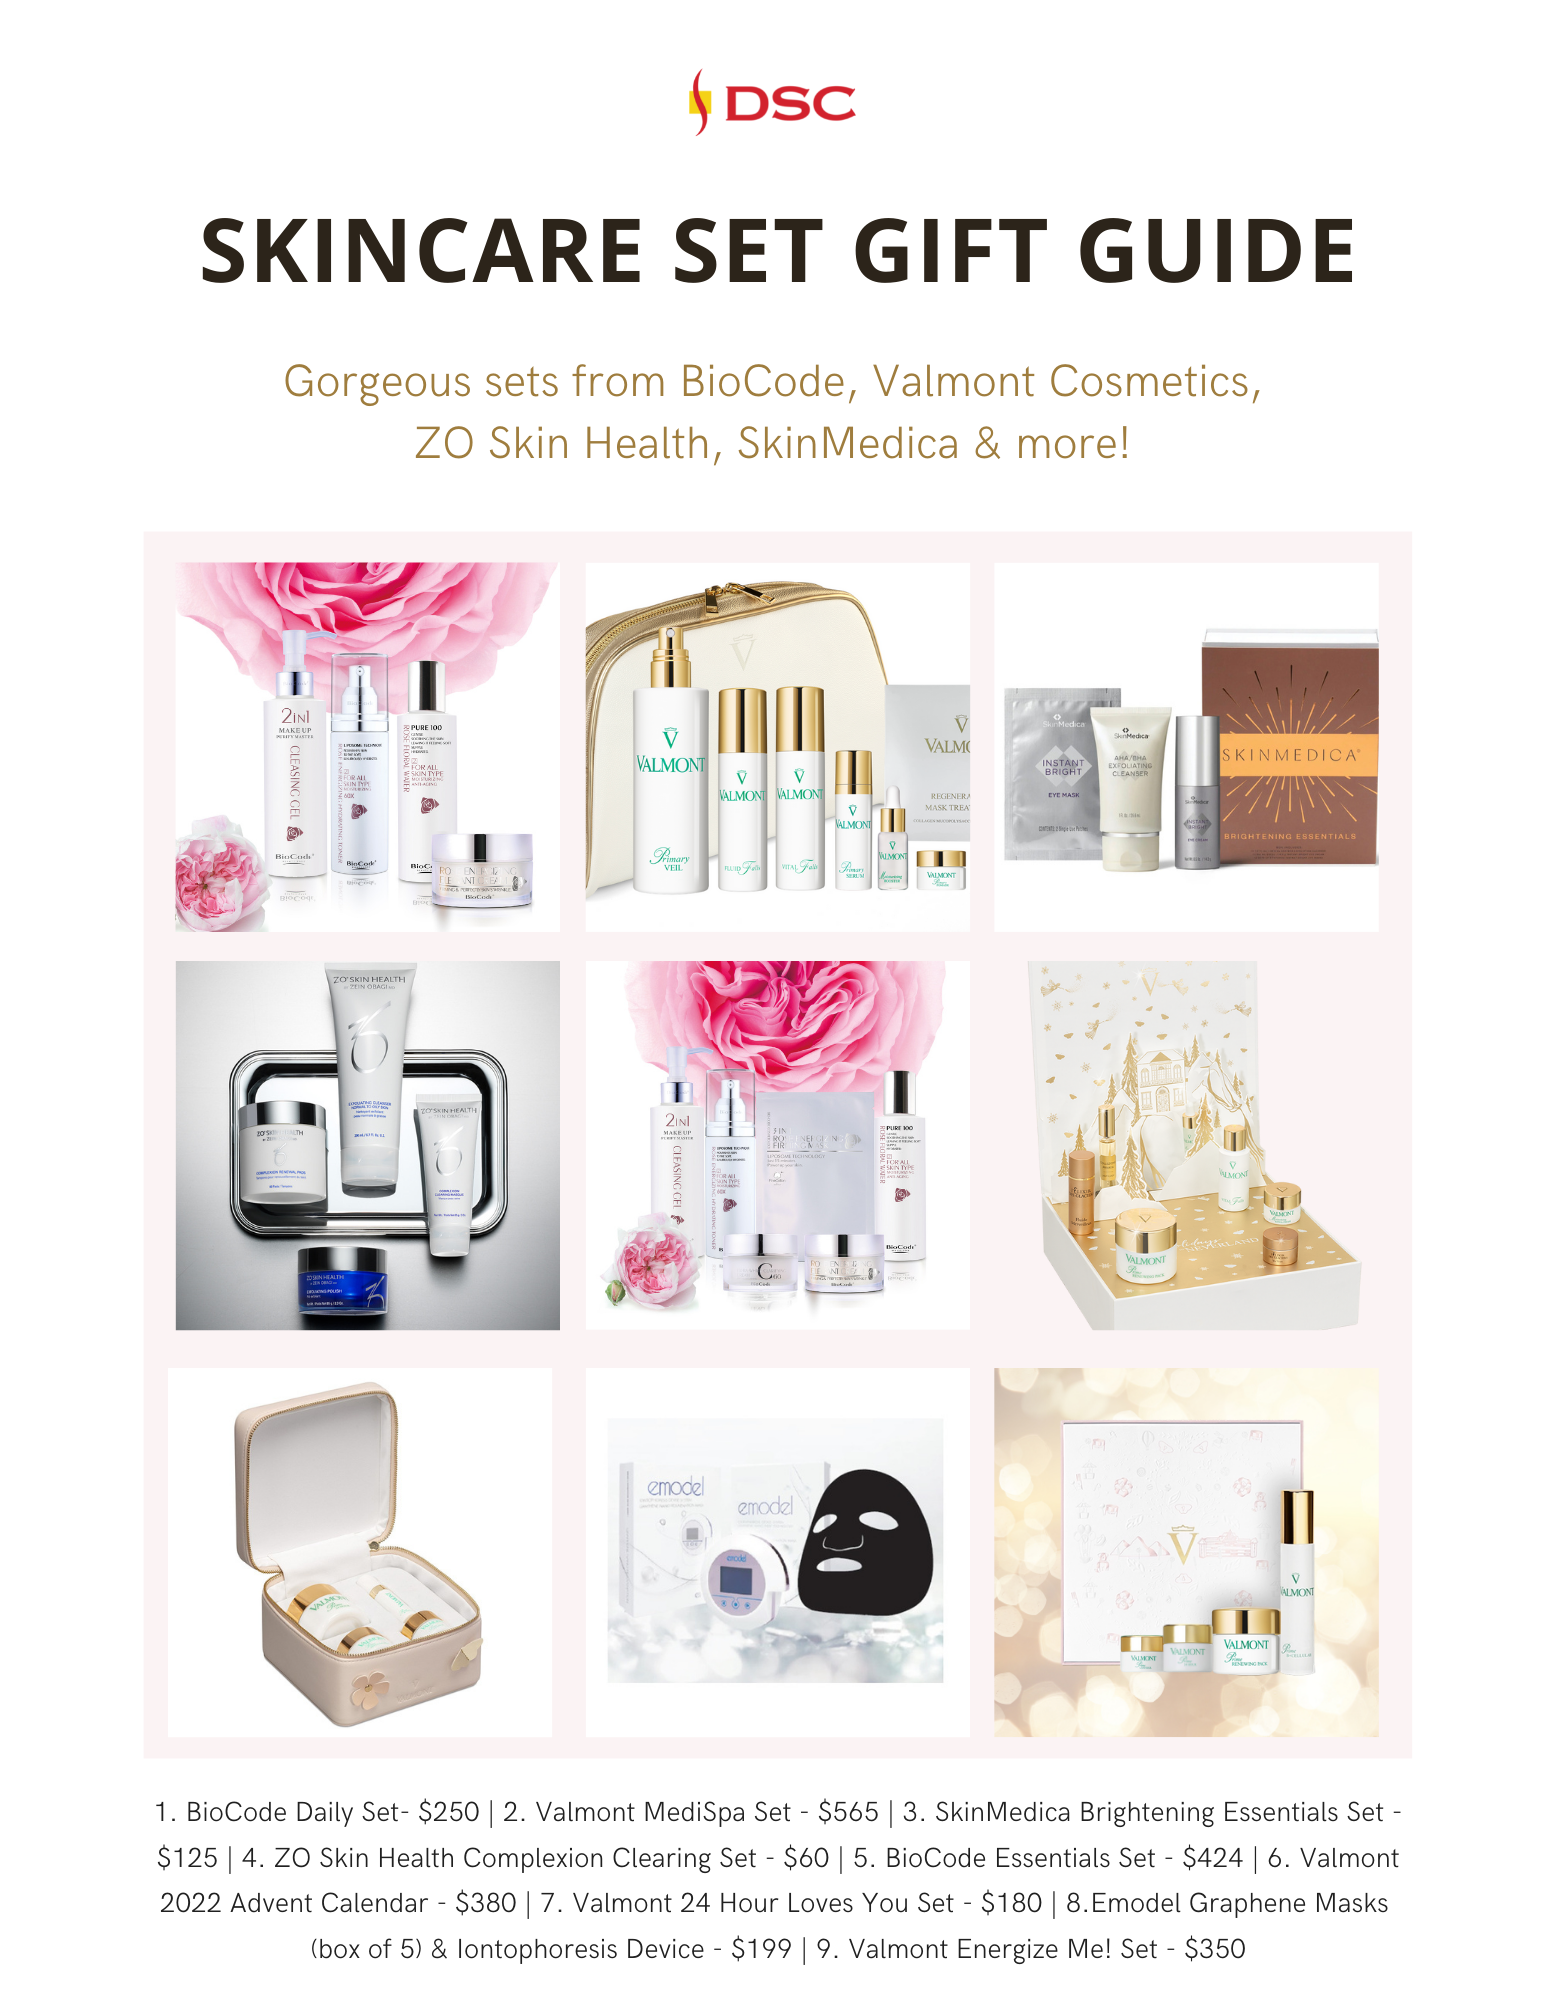 DSC 2022 holiday gift guide graphic for skincare sets featuring 3x3 grid of 9 skincare products with the text "Gorgeous sets from BioCode, Valmont Cosmetics, ZO Skin Health, SkinMedica & more!" at the top and the text "1. BioCode Daily Set- $250 | 2. Valmont MediSpa Set - $565 | 3. SkinMedica Brightening Essentials Set - $125 | 4. ZO Skin Health Complexion Clearing Set - $60 | 5. BioCode Essentials Set - $424 | 6. Valmont 2022 Advent Calendar - $380 | 7. Valmont 24 Hour Loves You Set - $180 | 8.Emodel Graphene Masks (box of 5) & Iontophoresis Device - $199 | 9. Valmont Energize Me! Set - $350" at the bottom